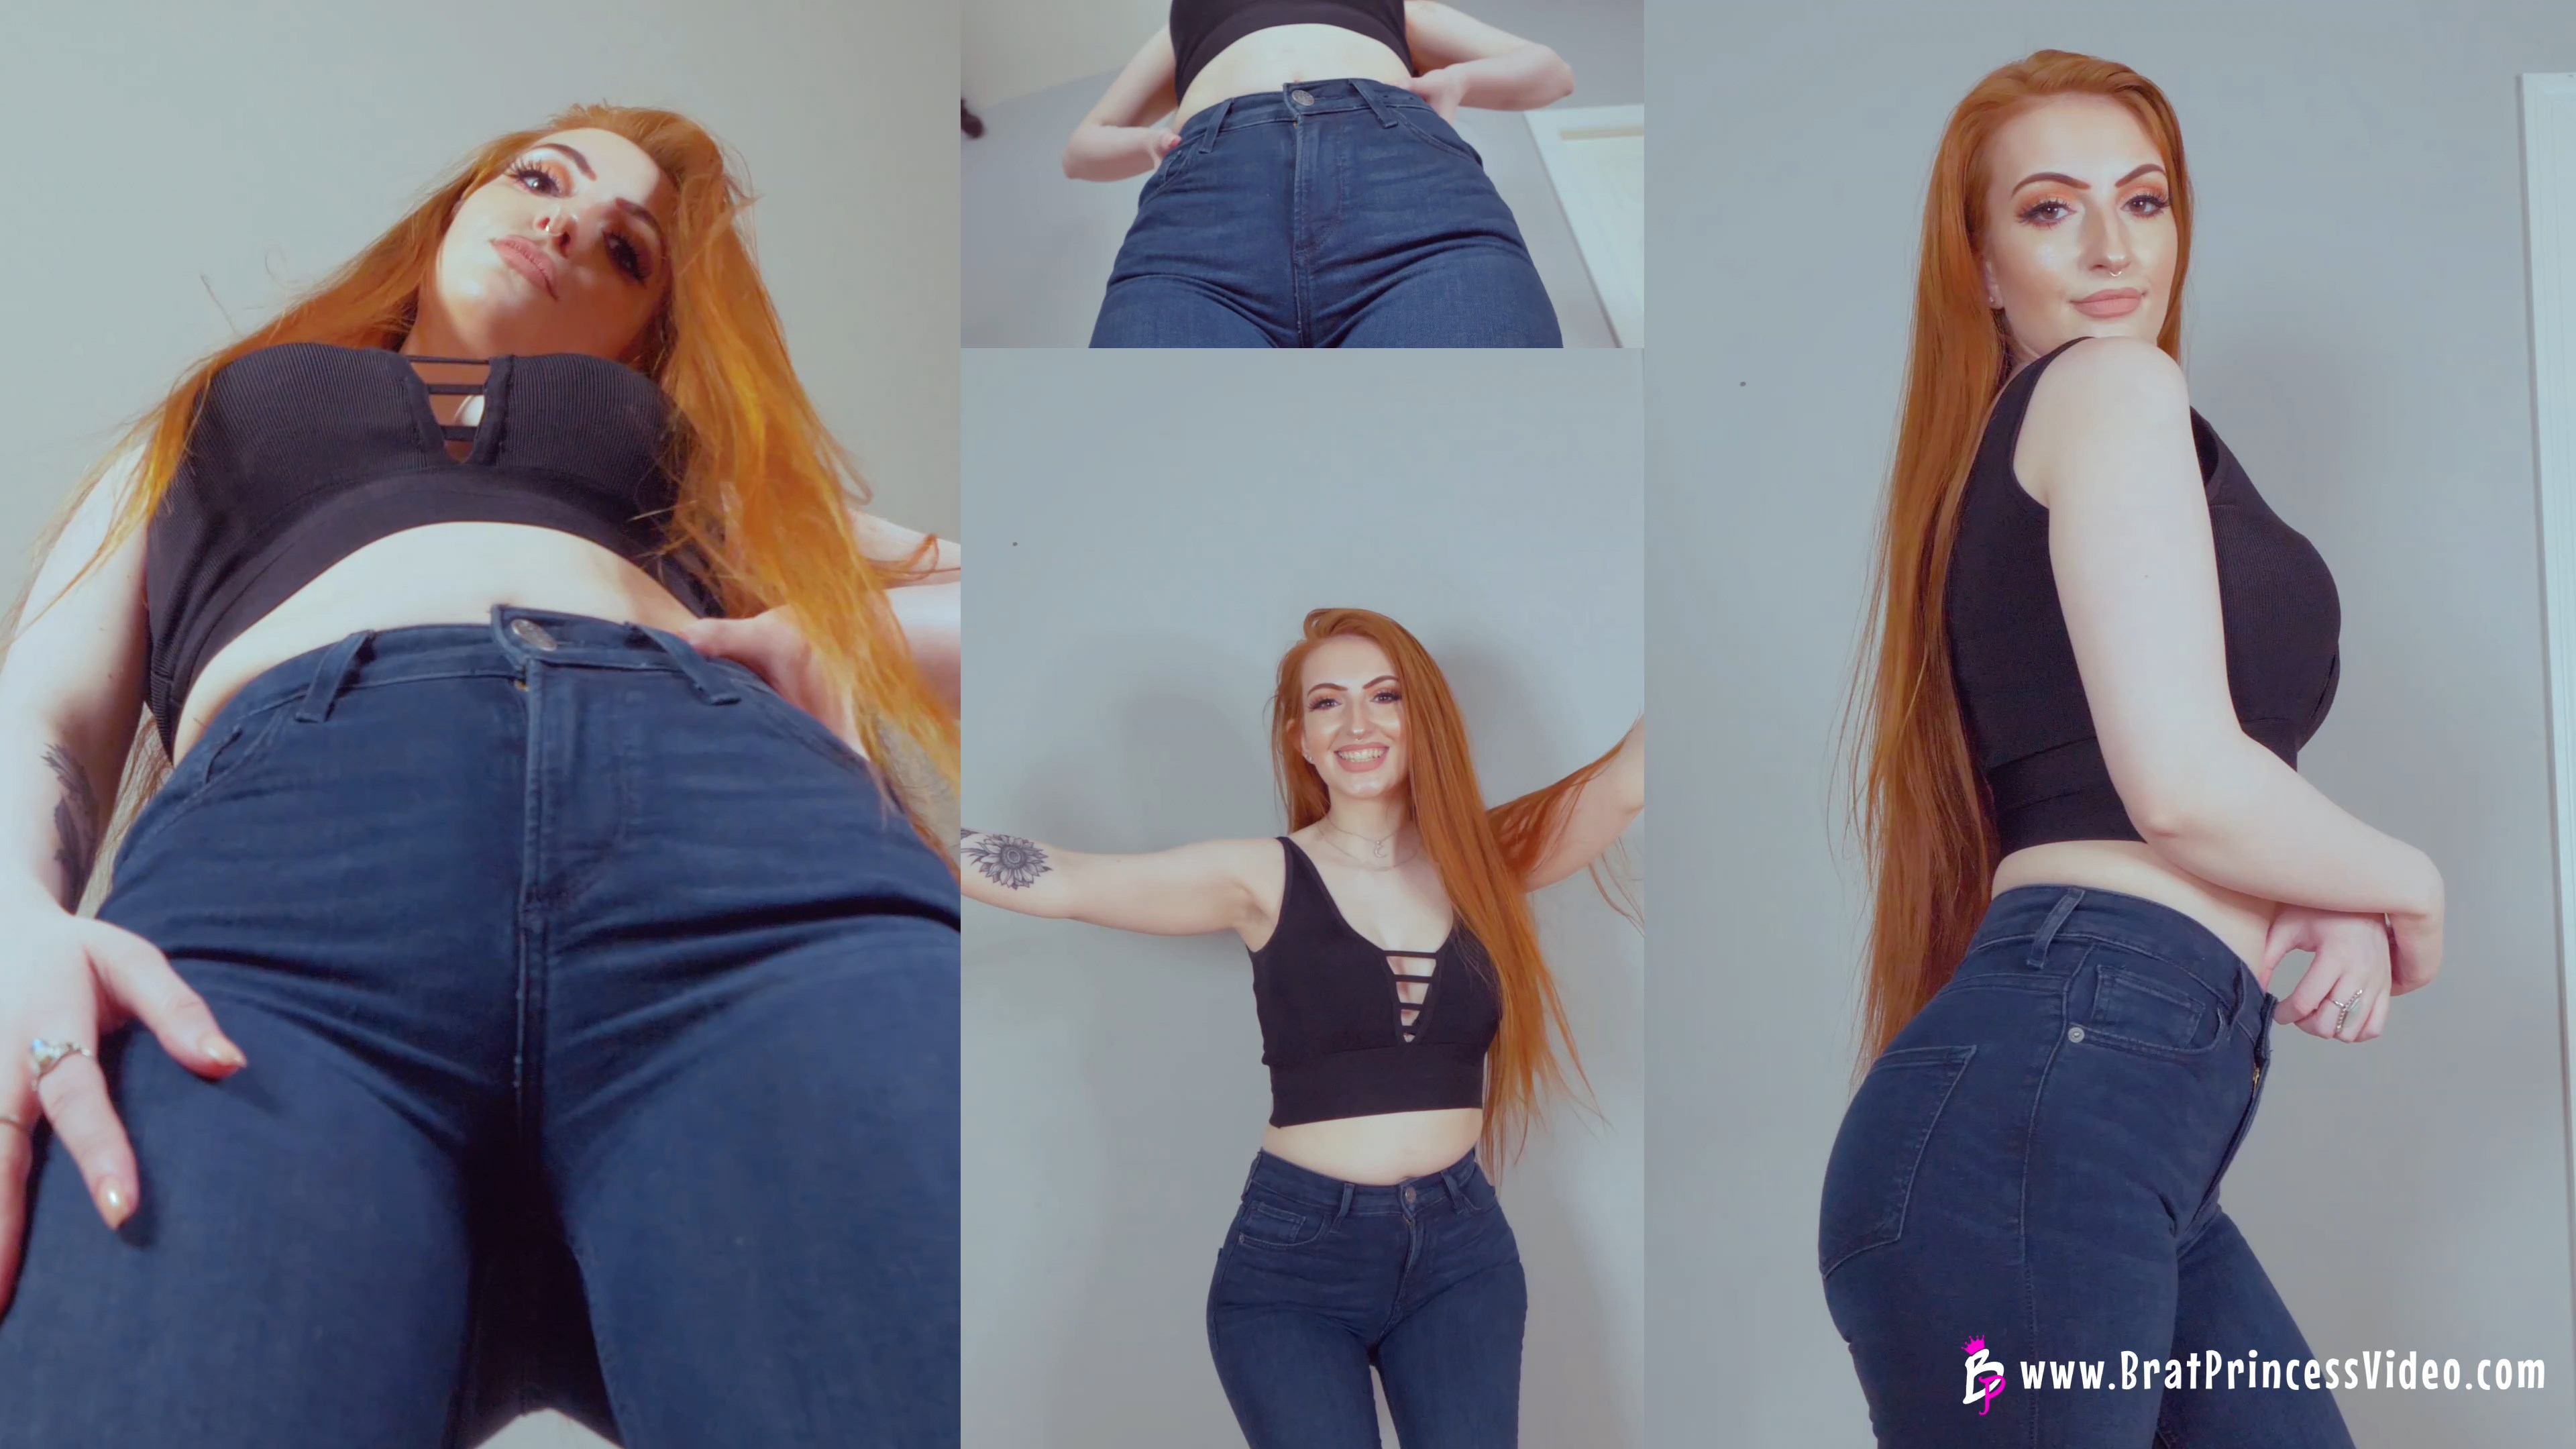 Riley - You Should Like Jeans Even More After This 3840x2160 HD